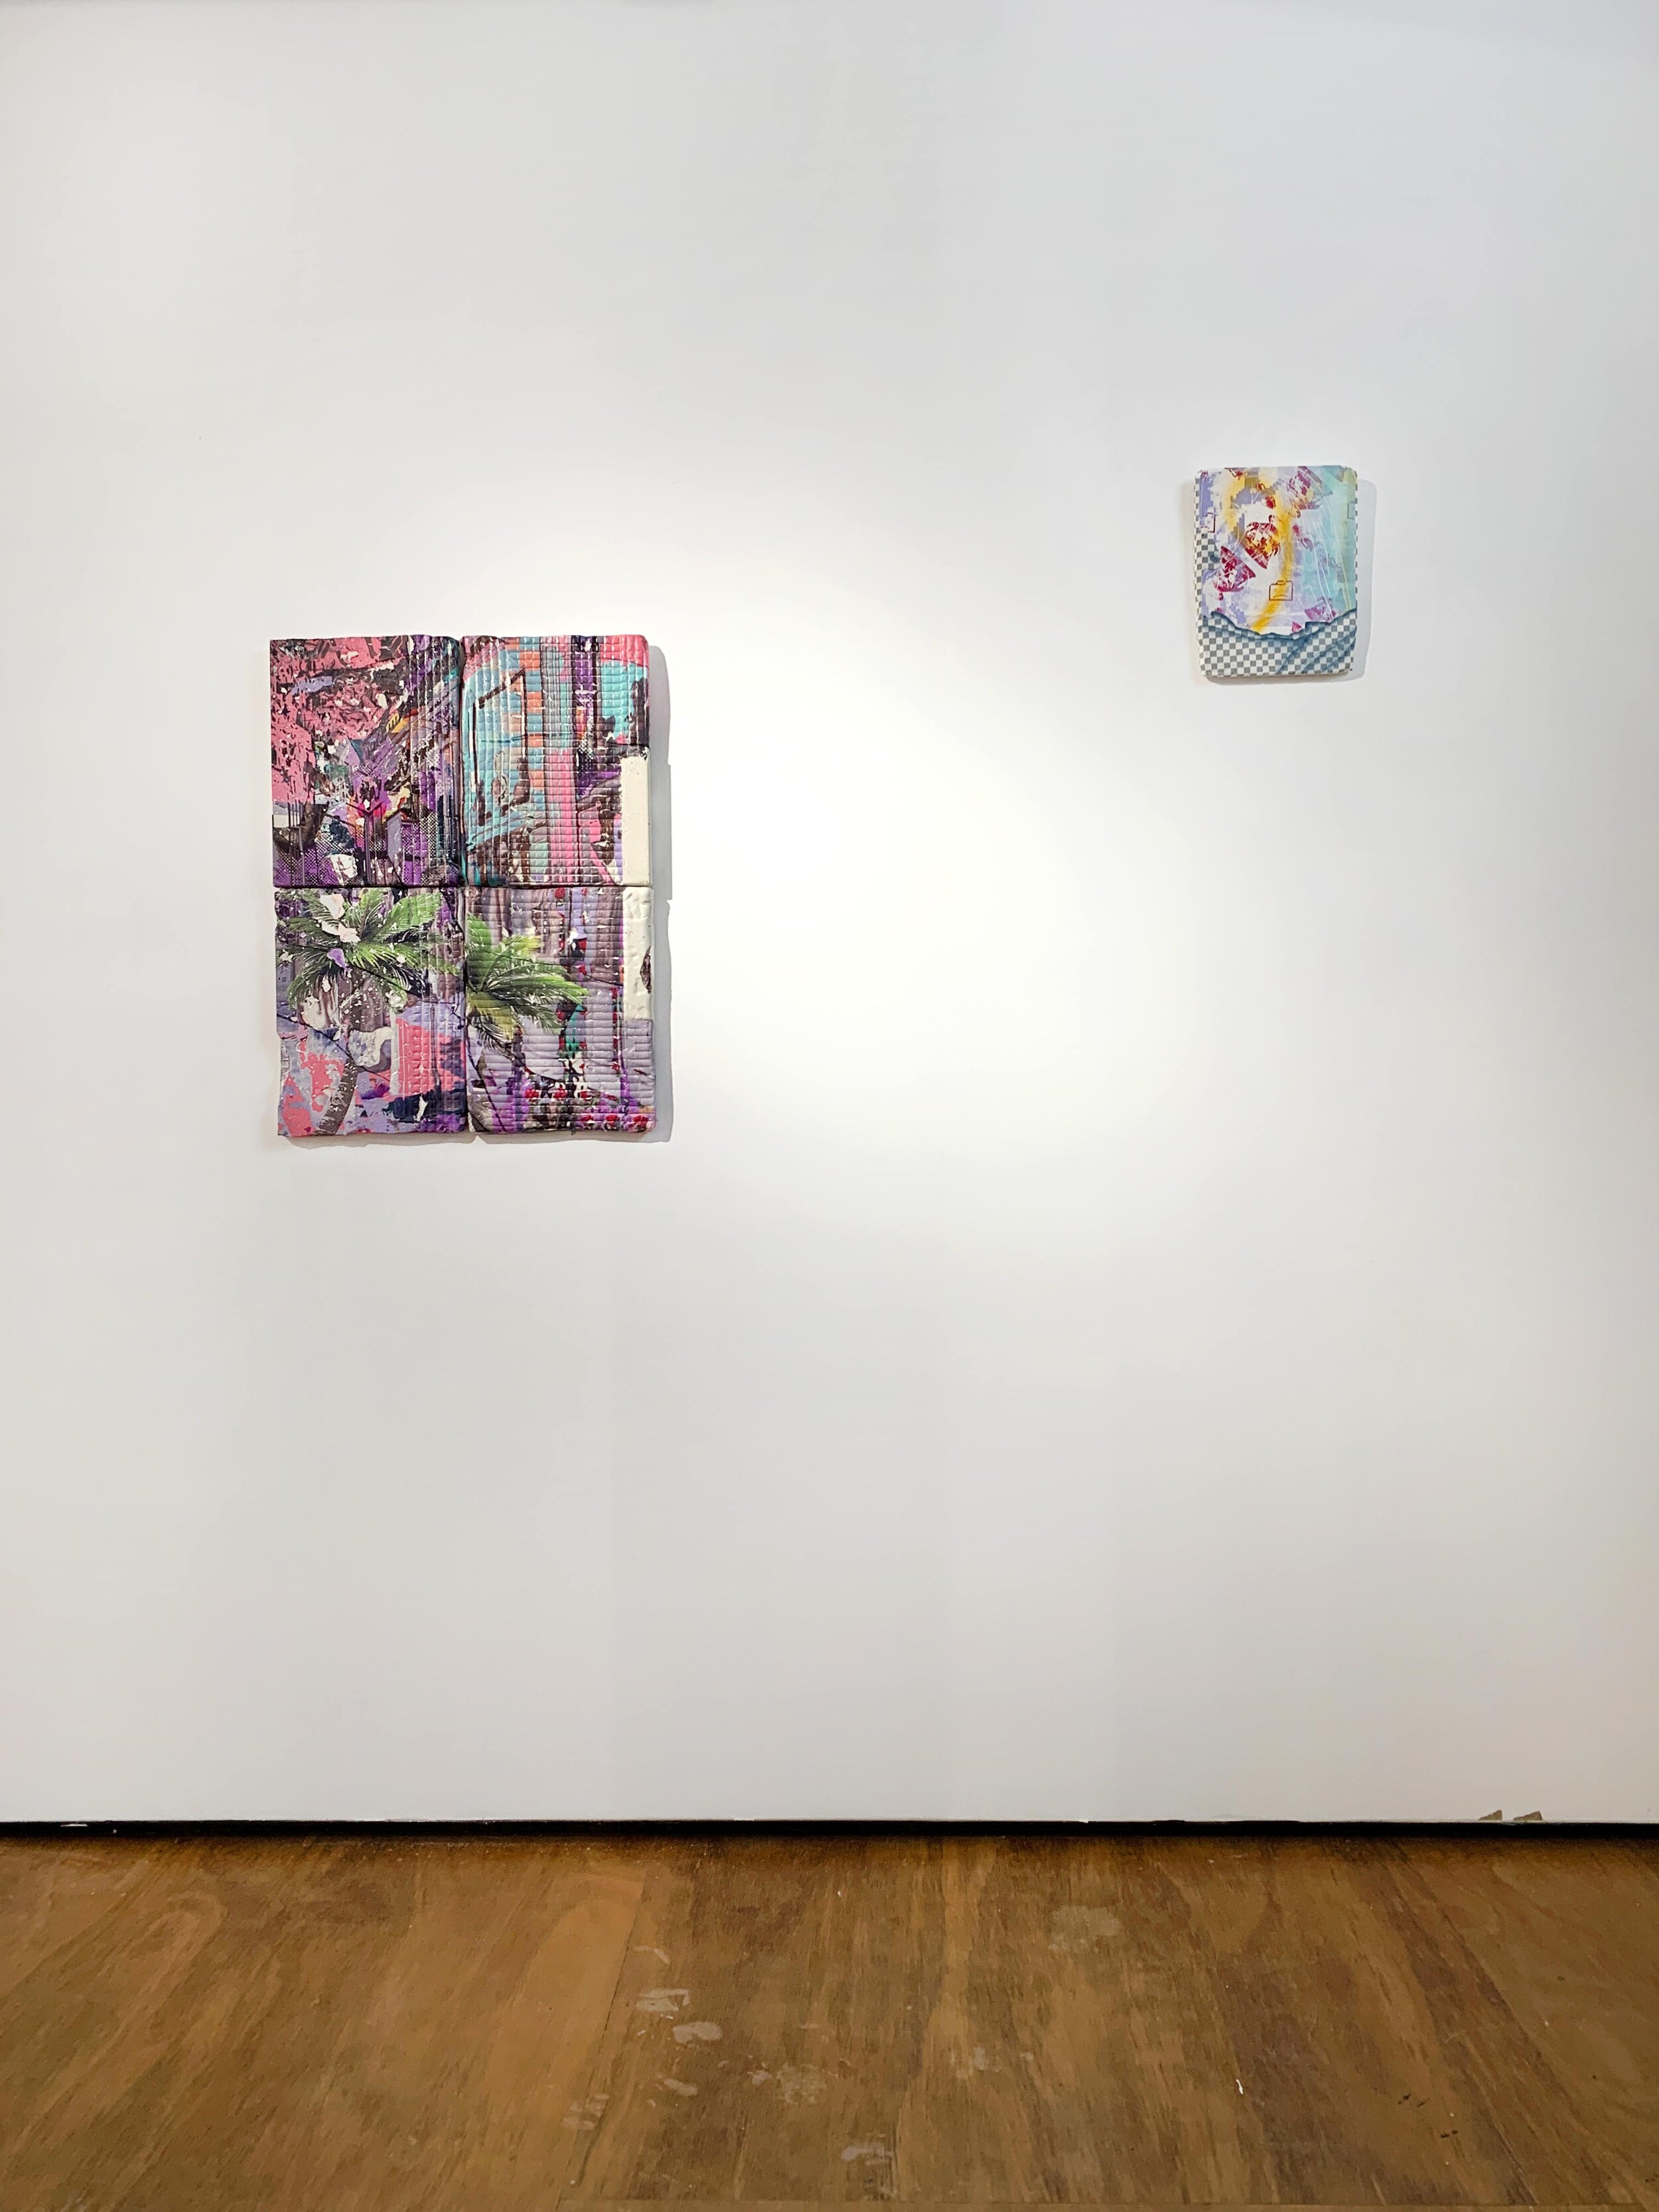   Fauxfacts  (installation view) 